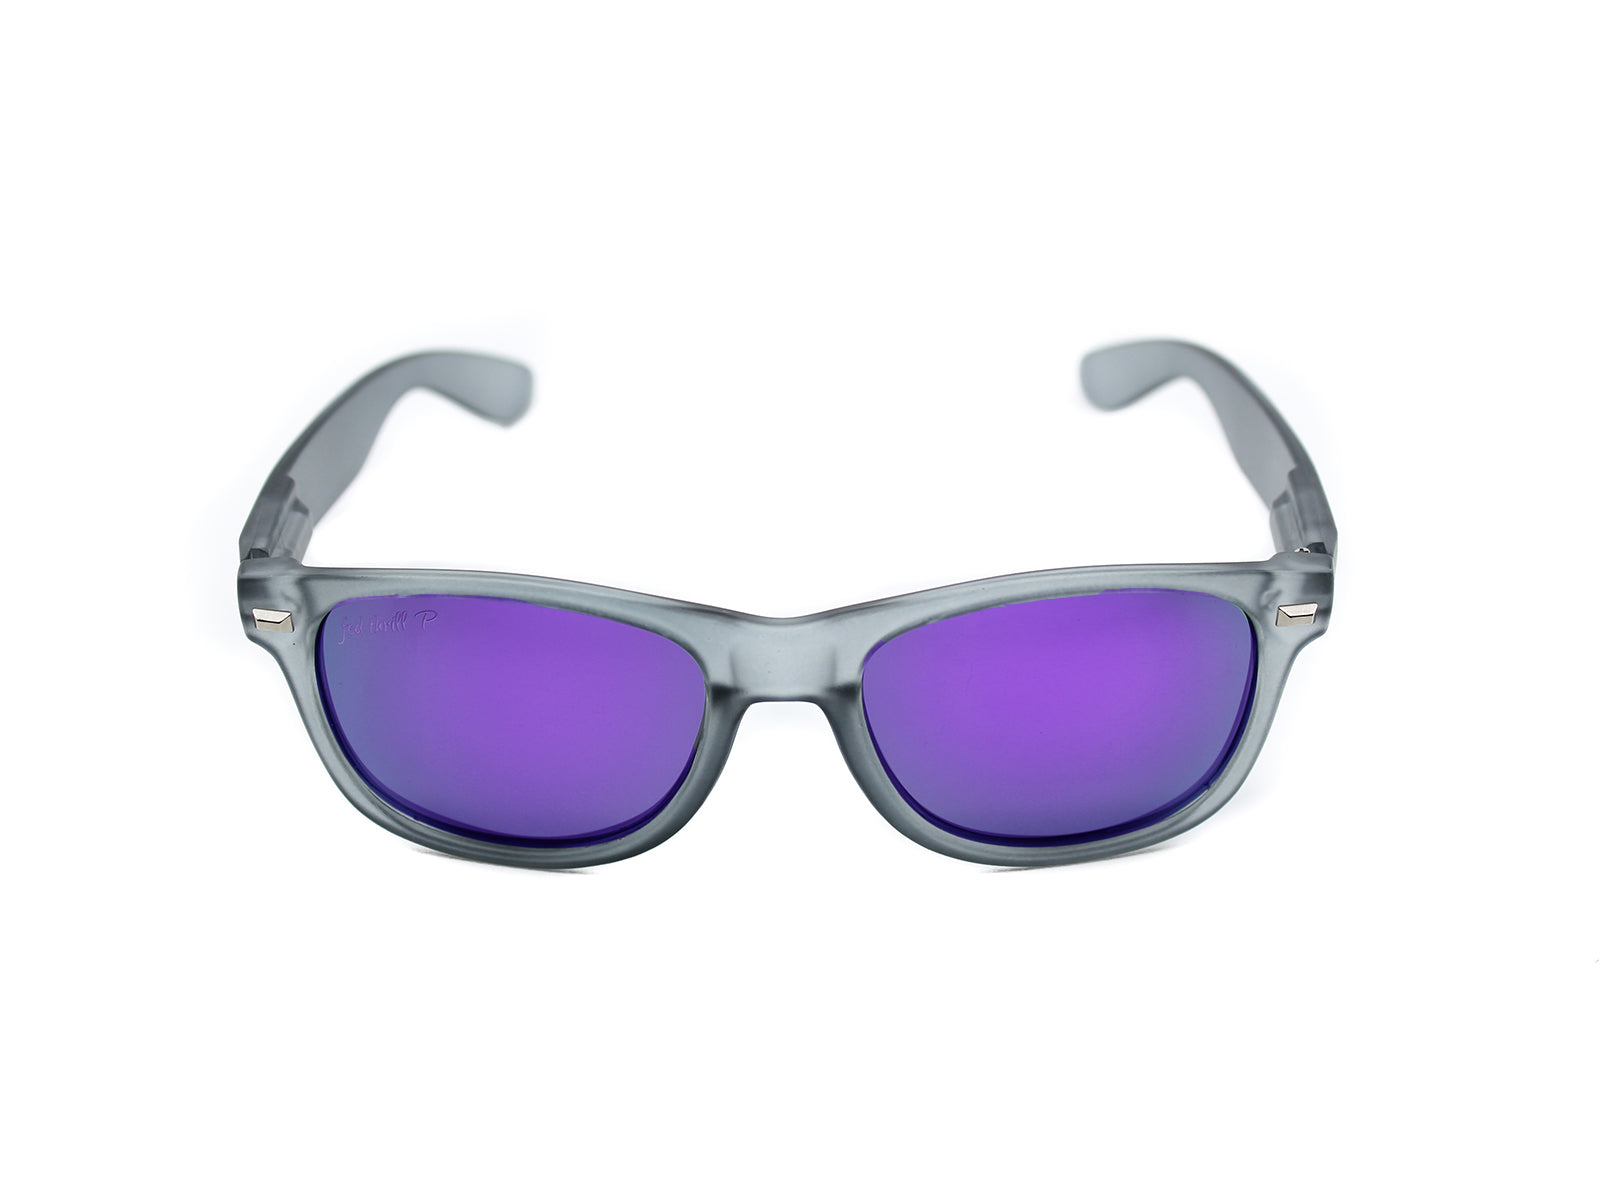 Fultons - Pratts: Frosted Gray / Mirrored Purple Polarized